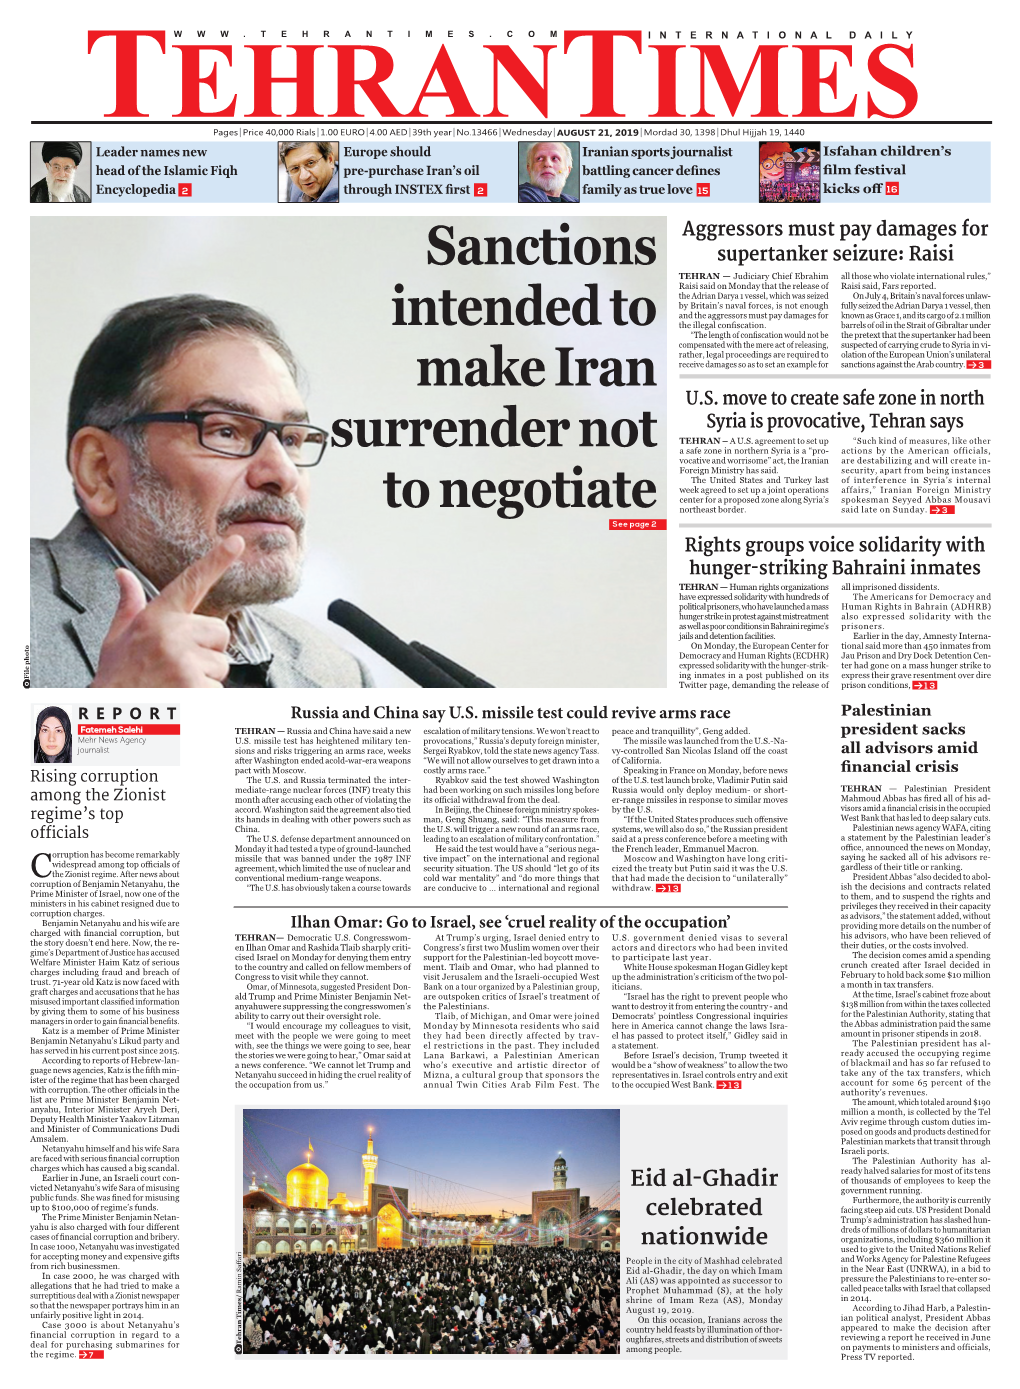 Sanctions Intended to Make Iran Surrender Not to Negotiate